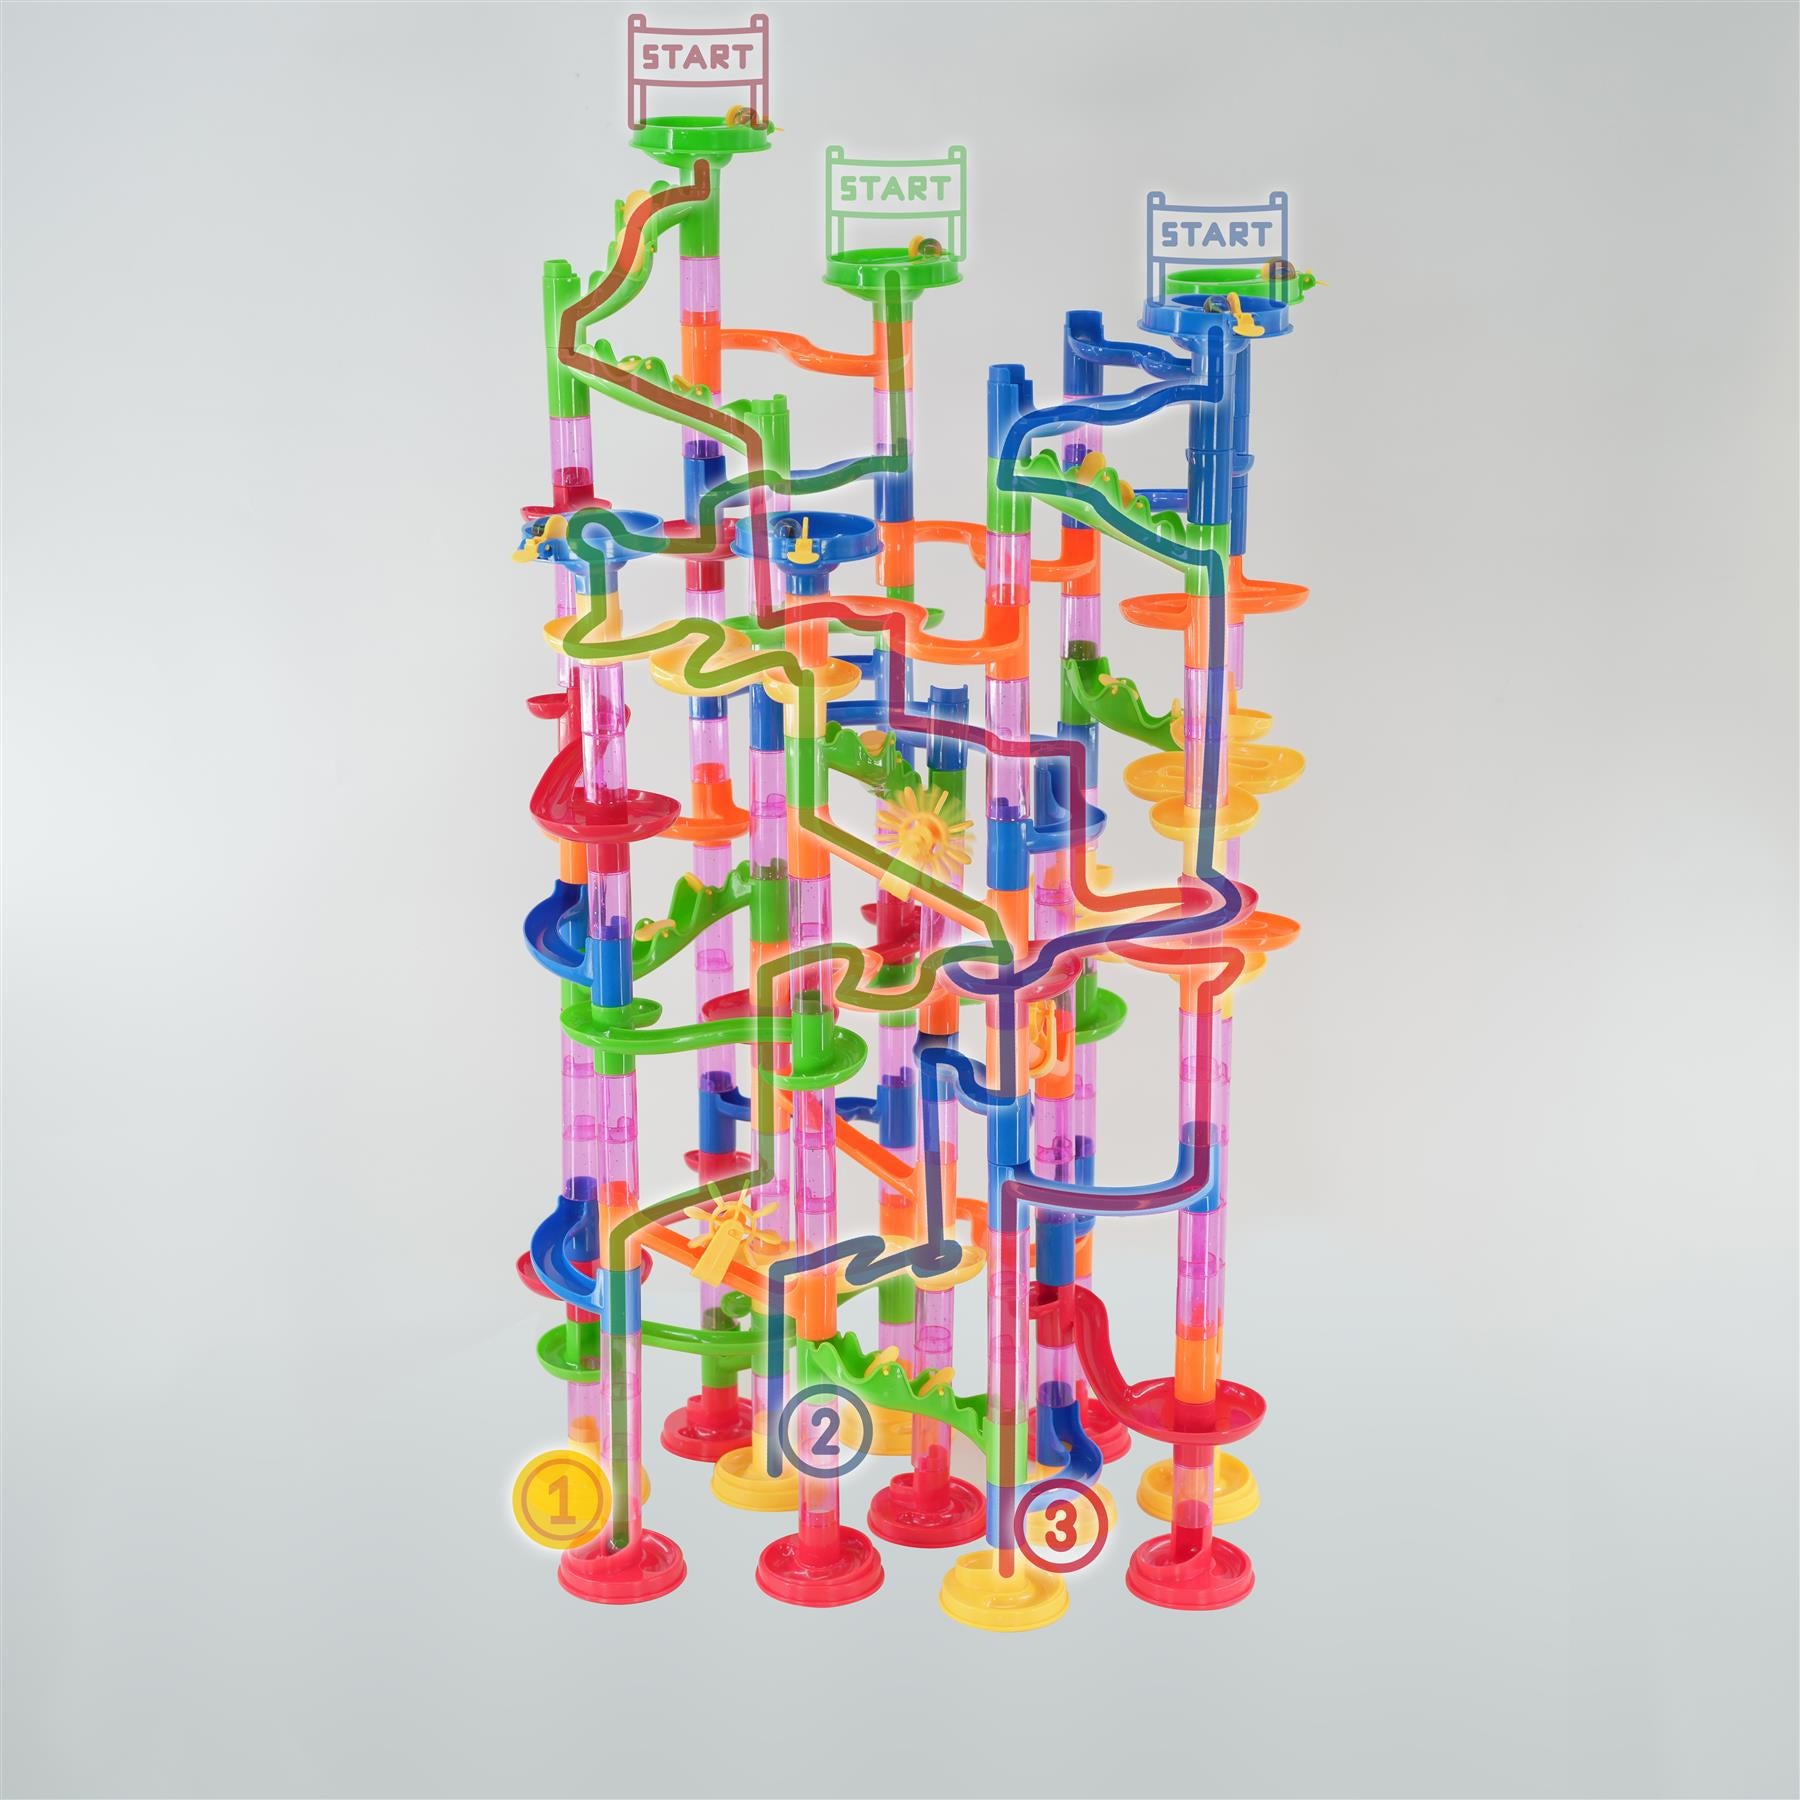 219 Pieces Marble Run Race Set by The Magic Toy Shop - UKBuyZone